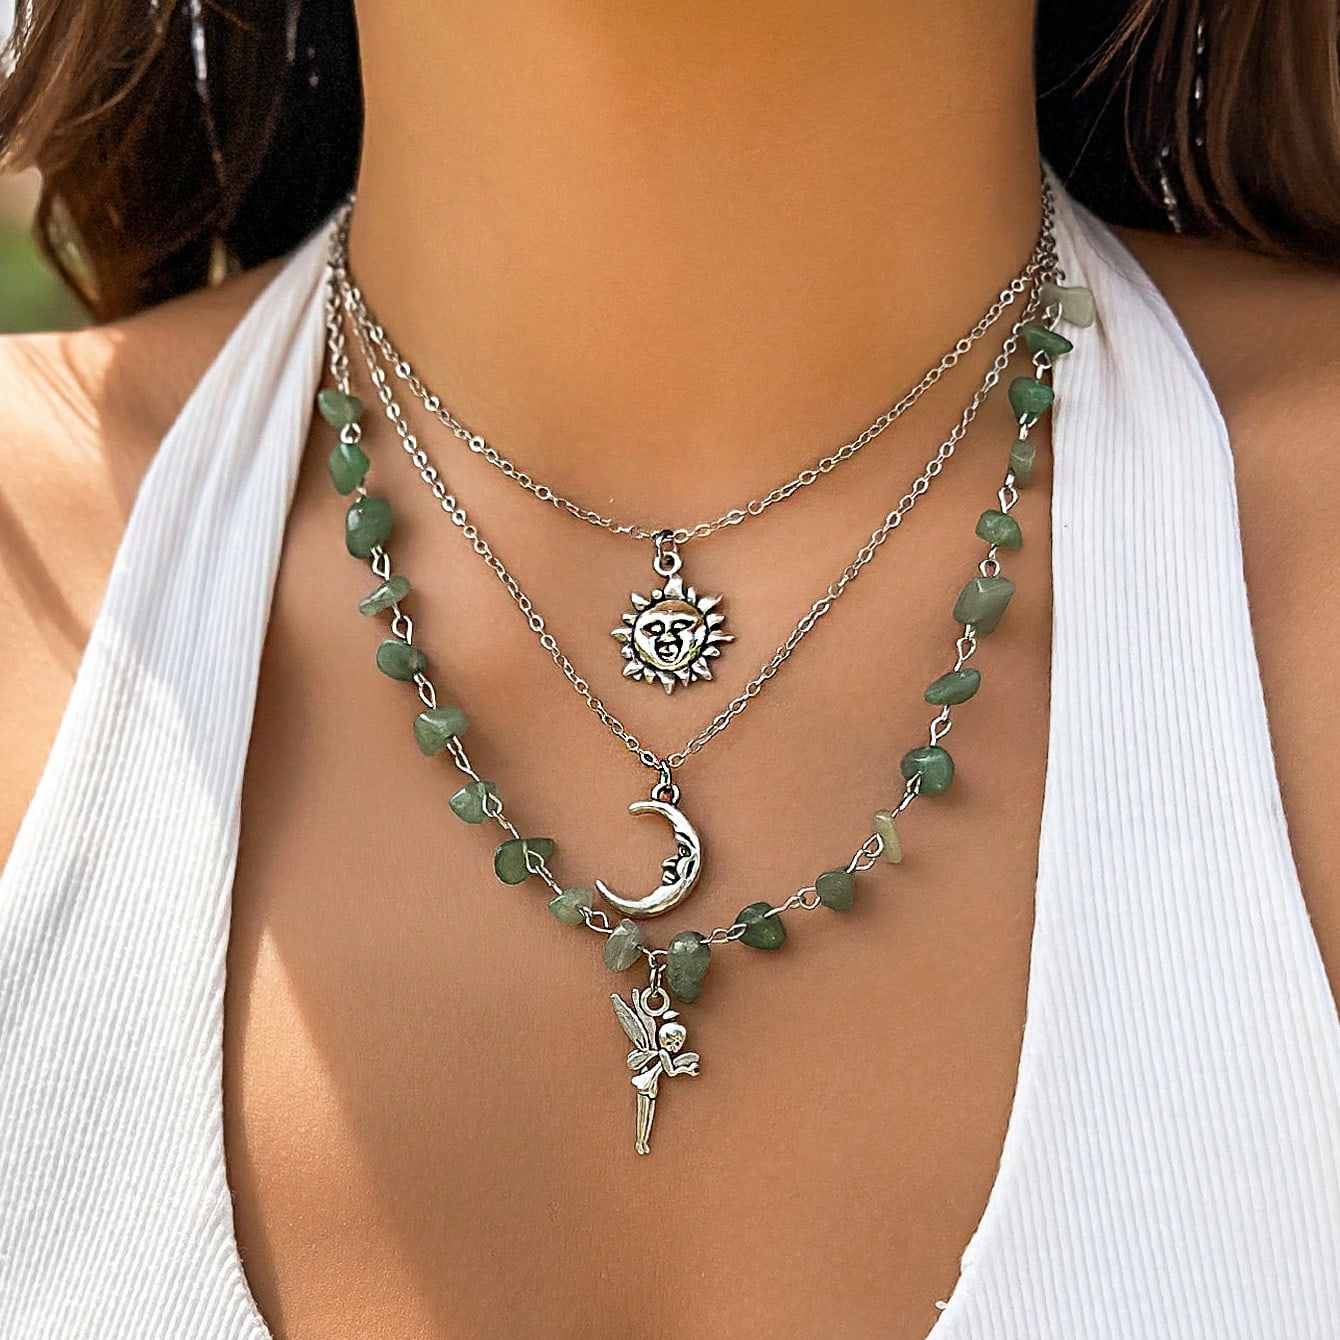 

3-piece Fairycore Fashion Necklace Set, Simple Crescent Moon, Sun Pendant & Beaded Chain, Vintage Bohemian Style, Layered Jewelry Accessory